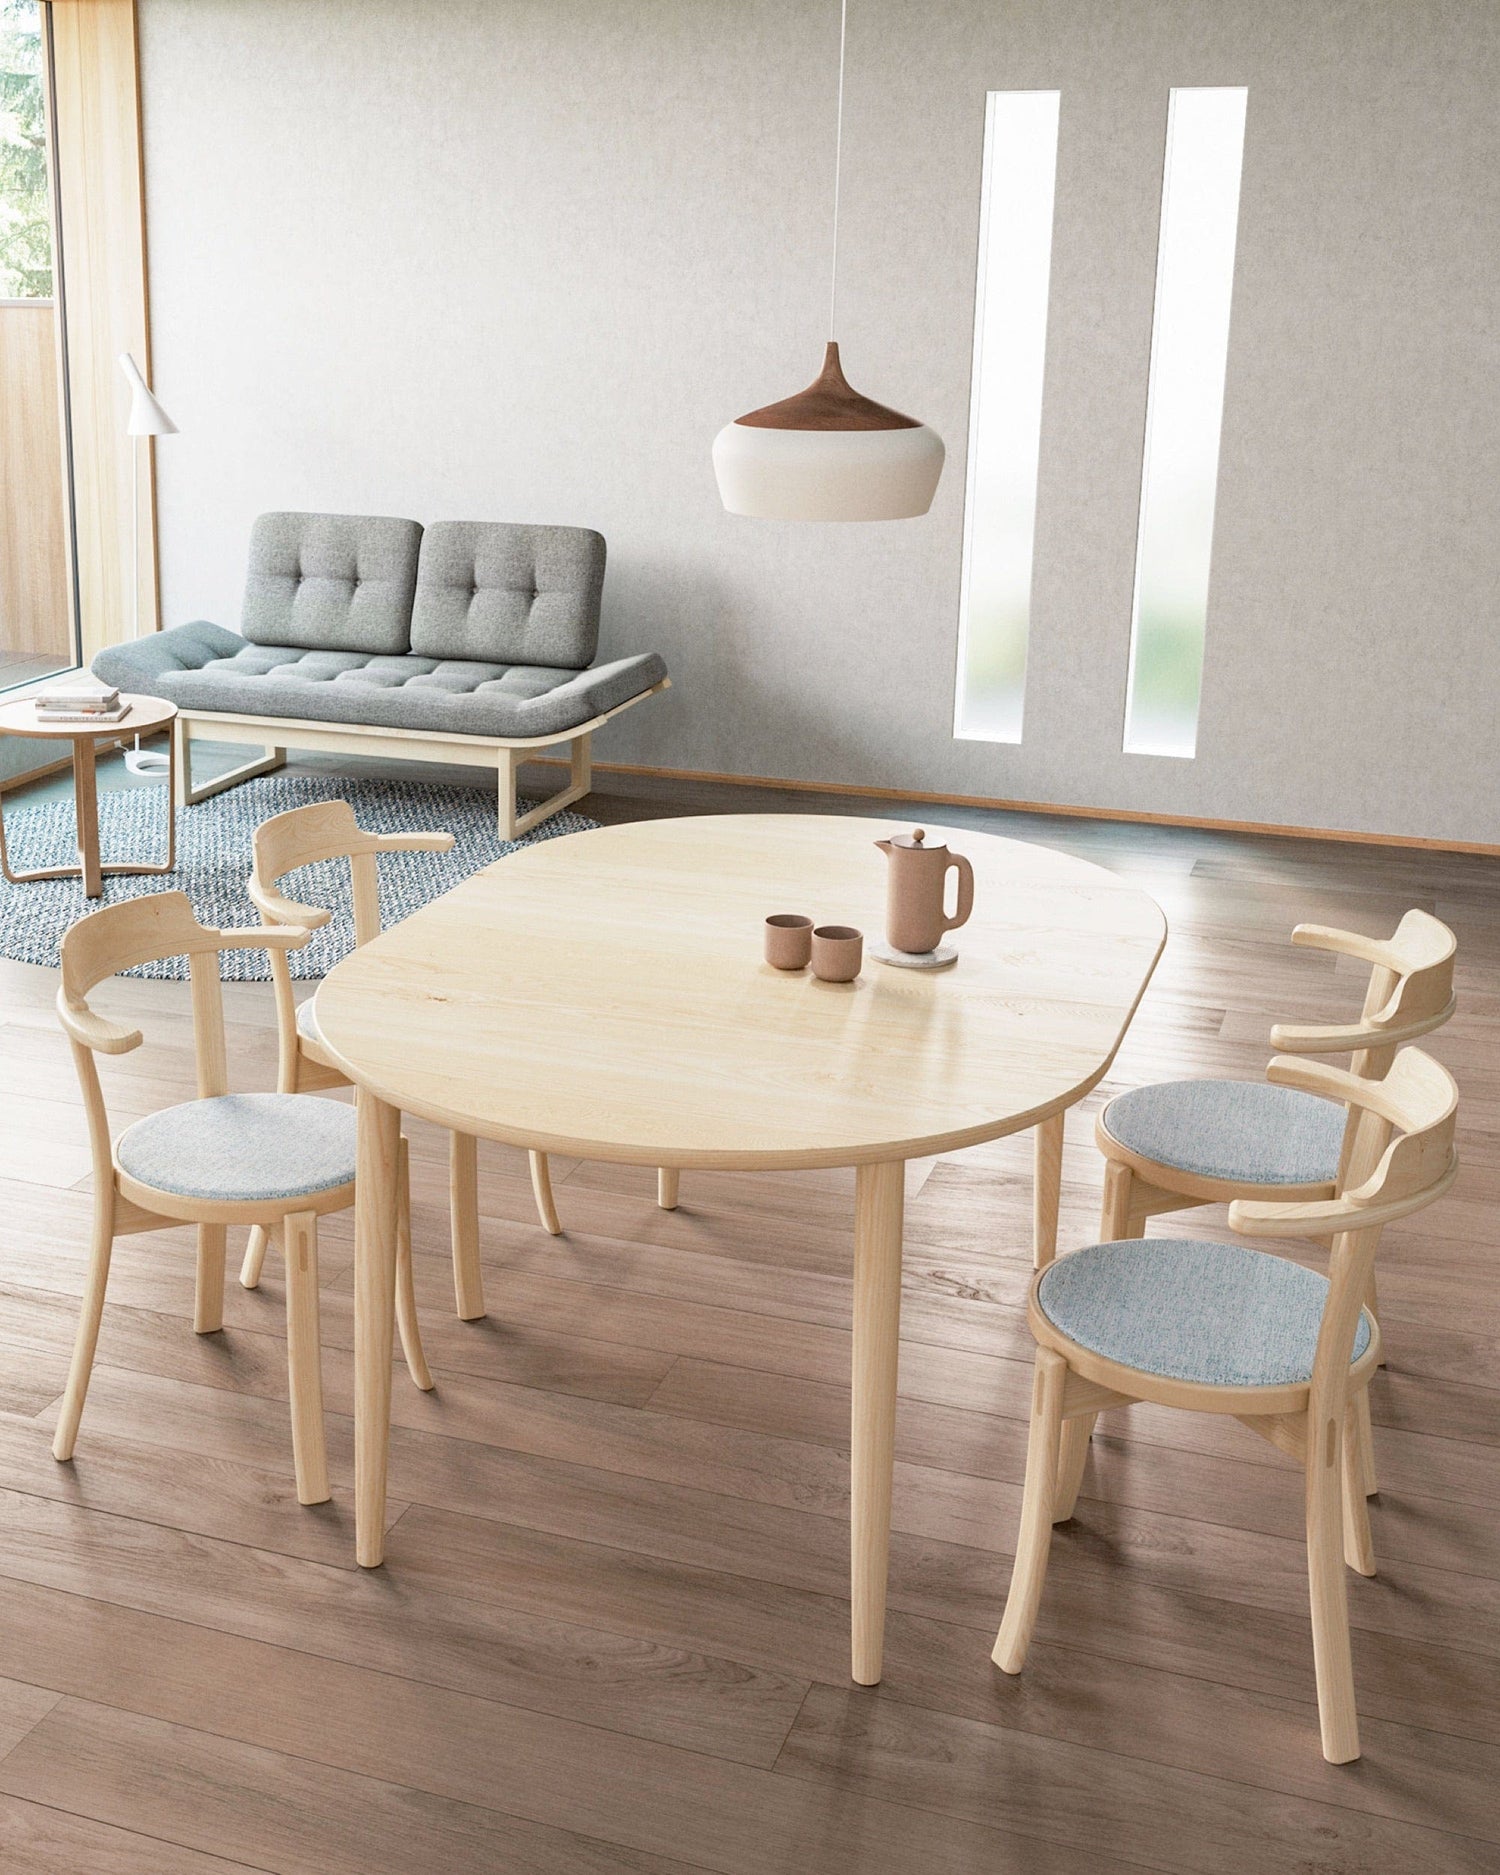 COKU Home Lucia Luxury Round Natural Solid Acacia Wood Dining Table 120cm  Diameter Seats Up To 6 People Scandinavian/Japandi Inspired Table